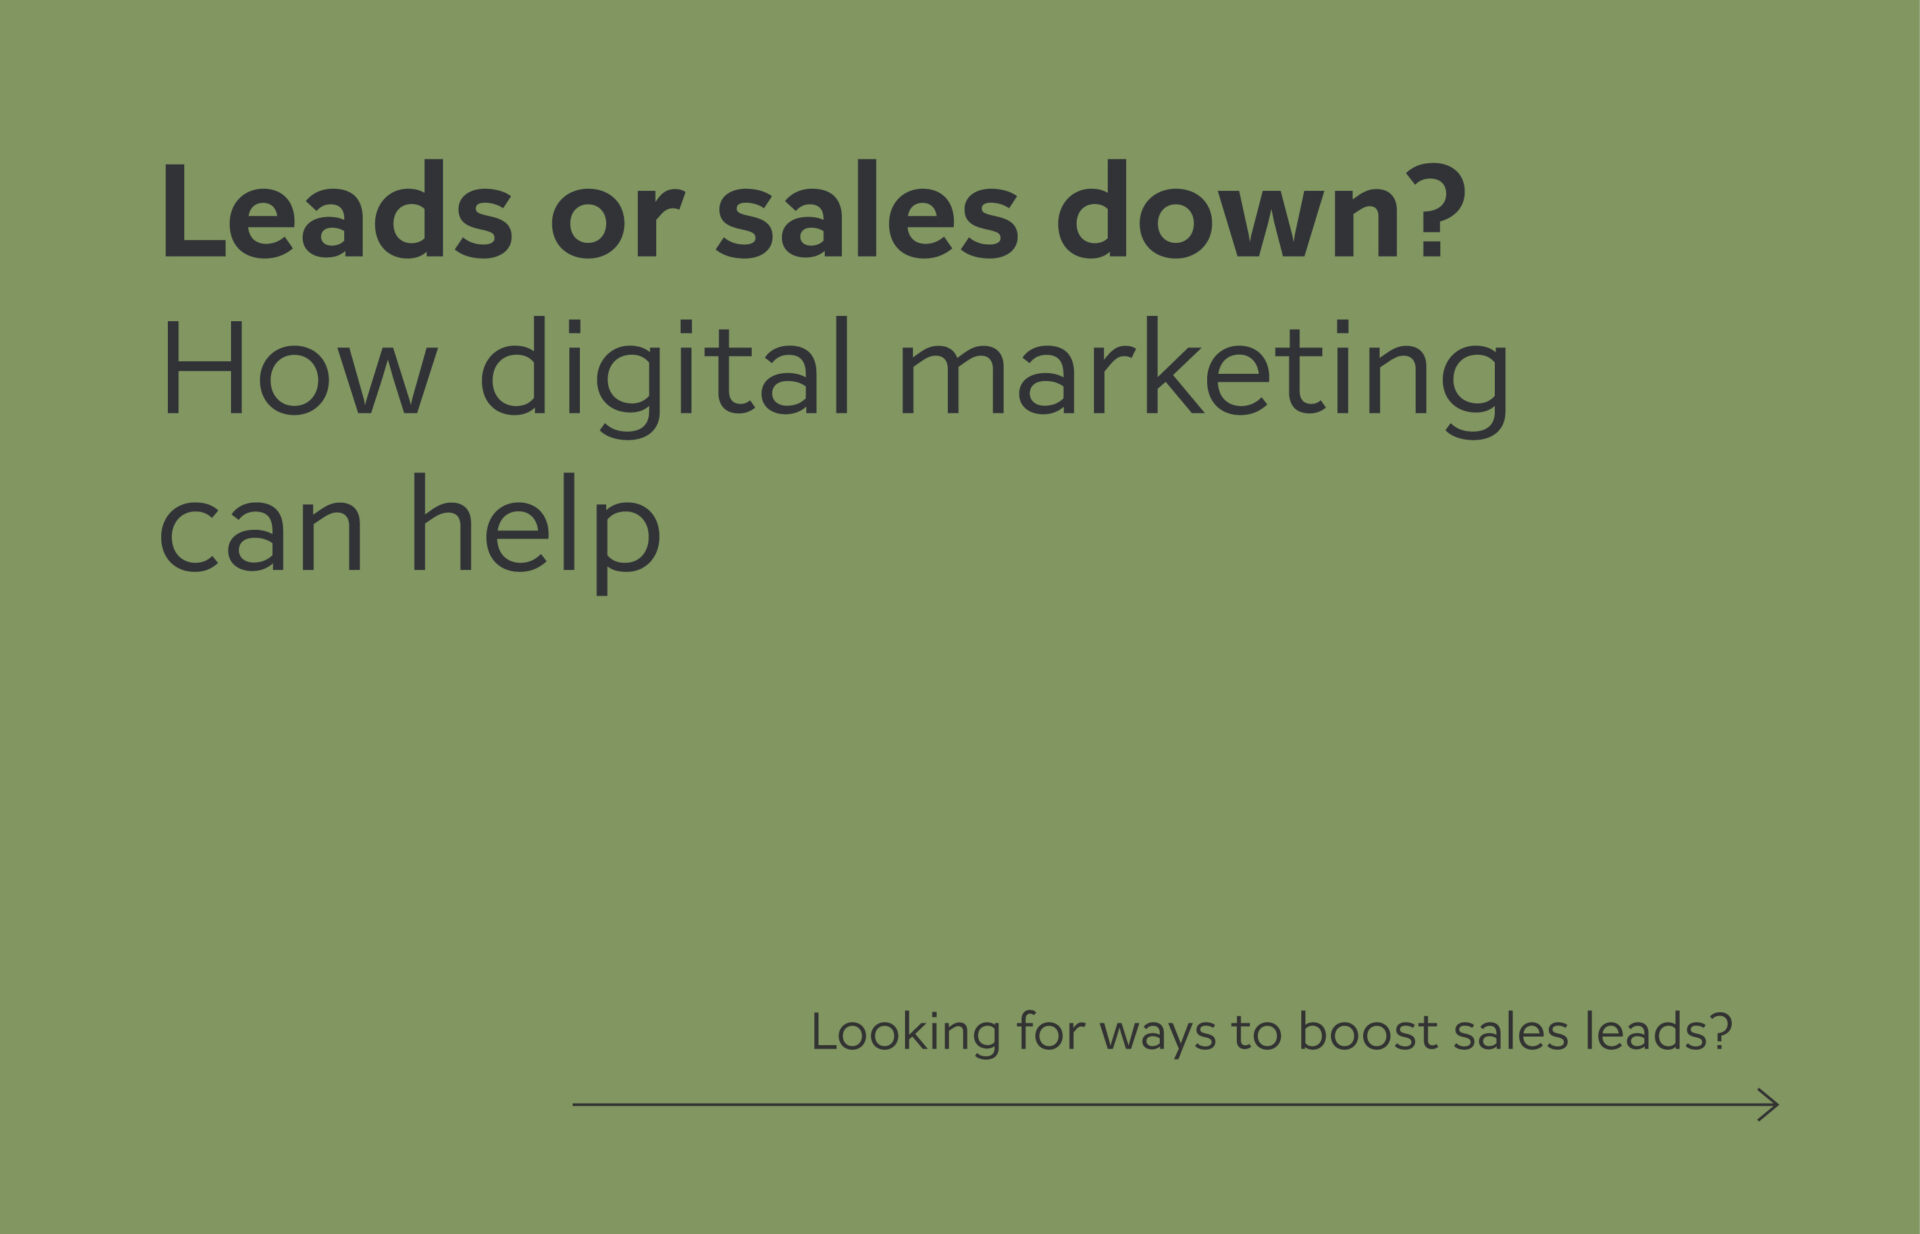 Leads or sales down? How digital marketing can help